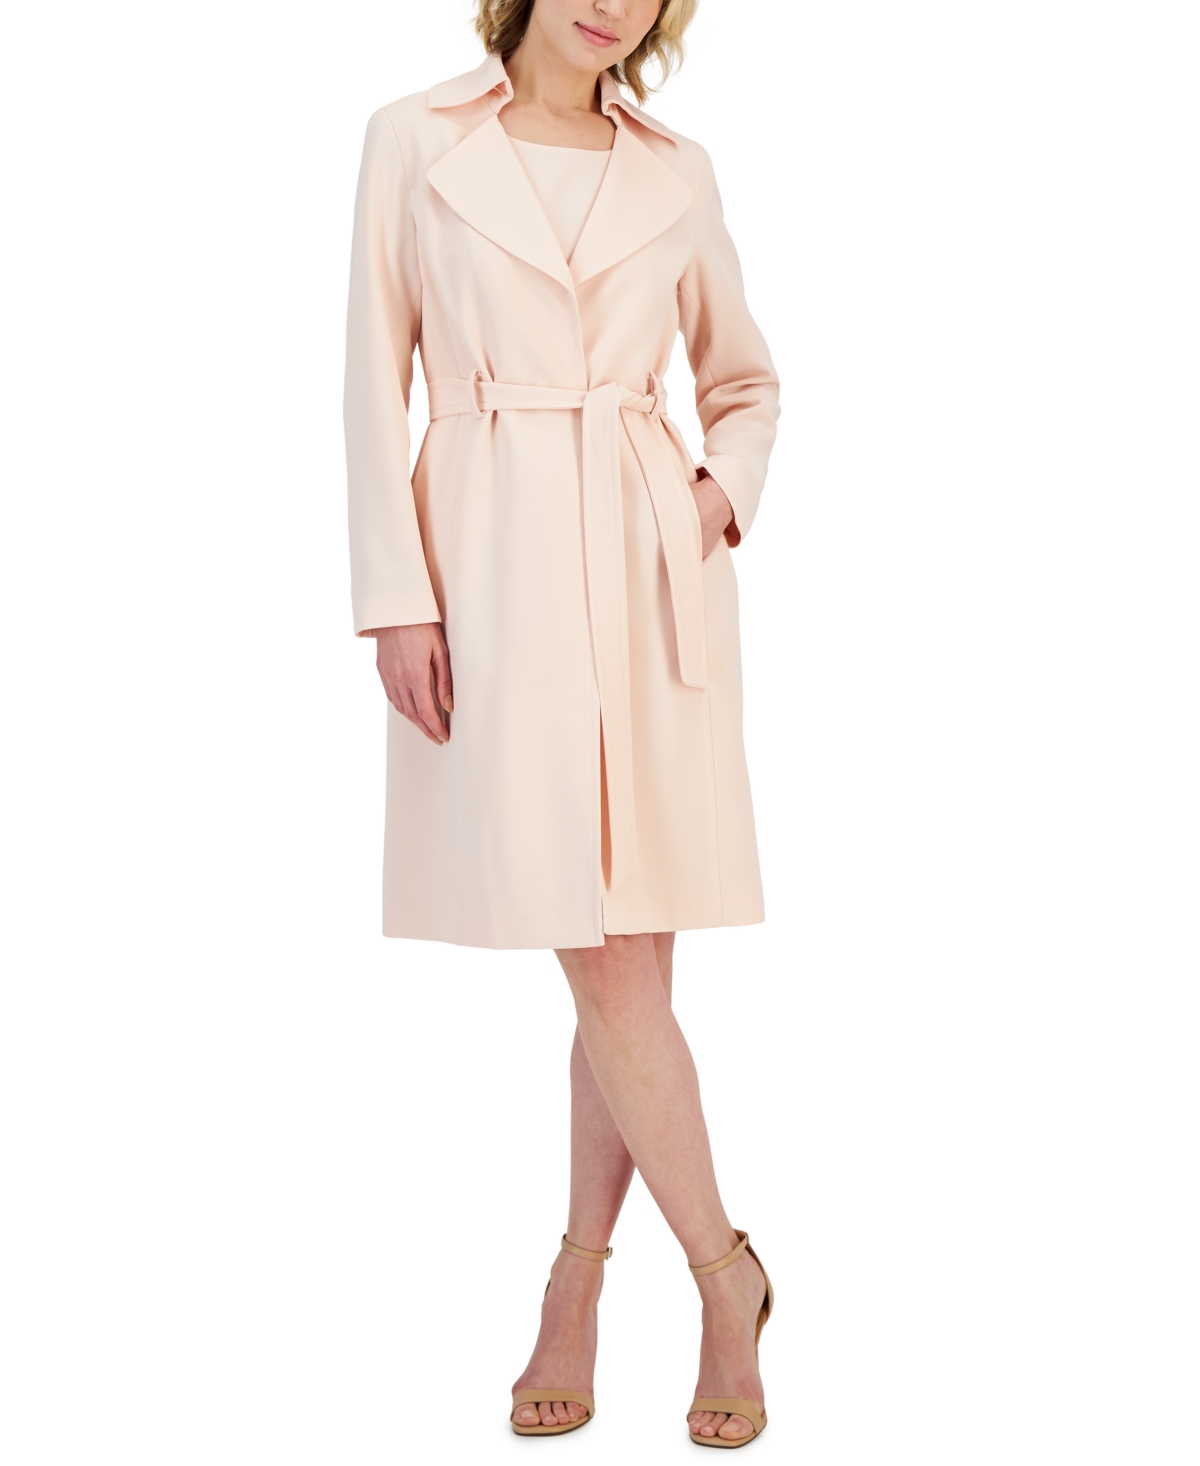 Women's Crepe Belted Trench Jacket & Sheath Dress Suit, Regular and Petite Sizes - Light Blossom